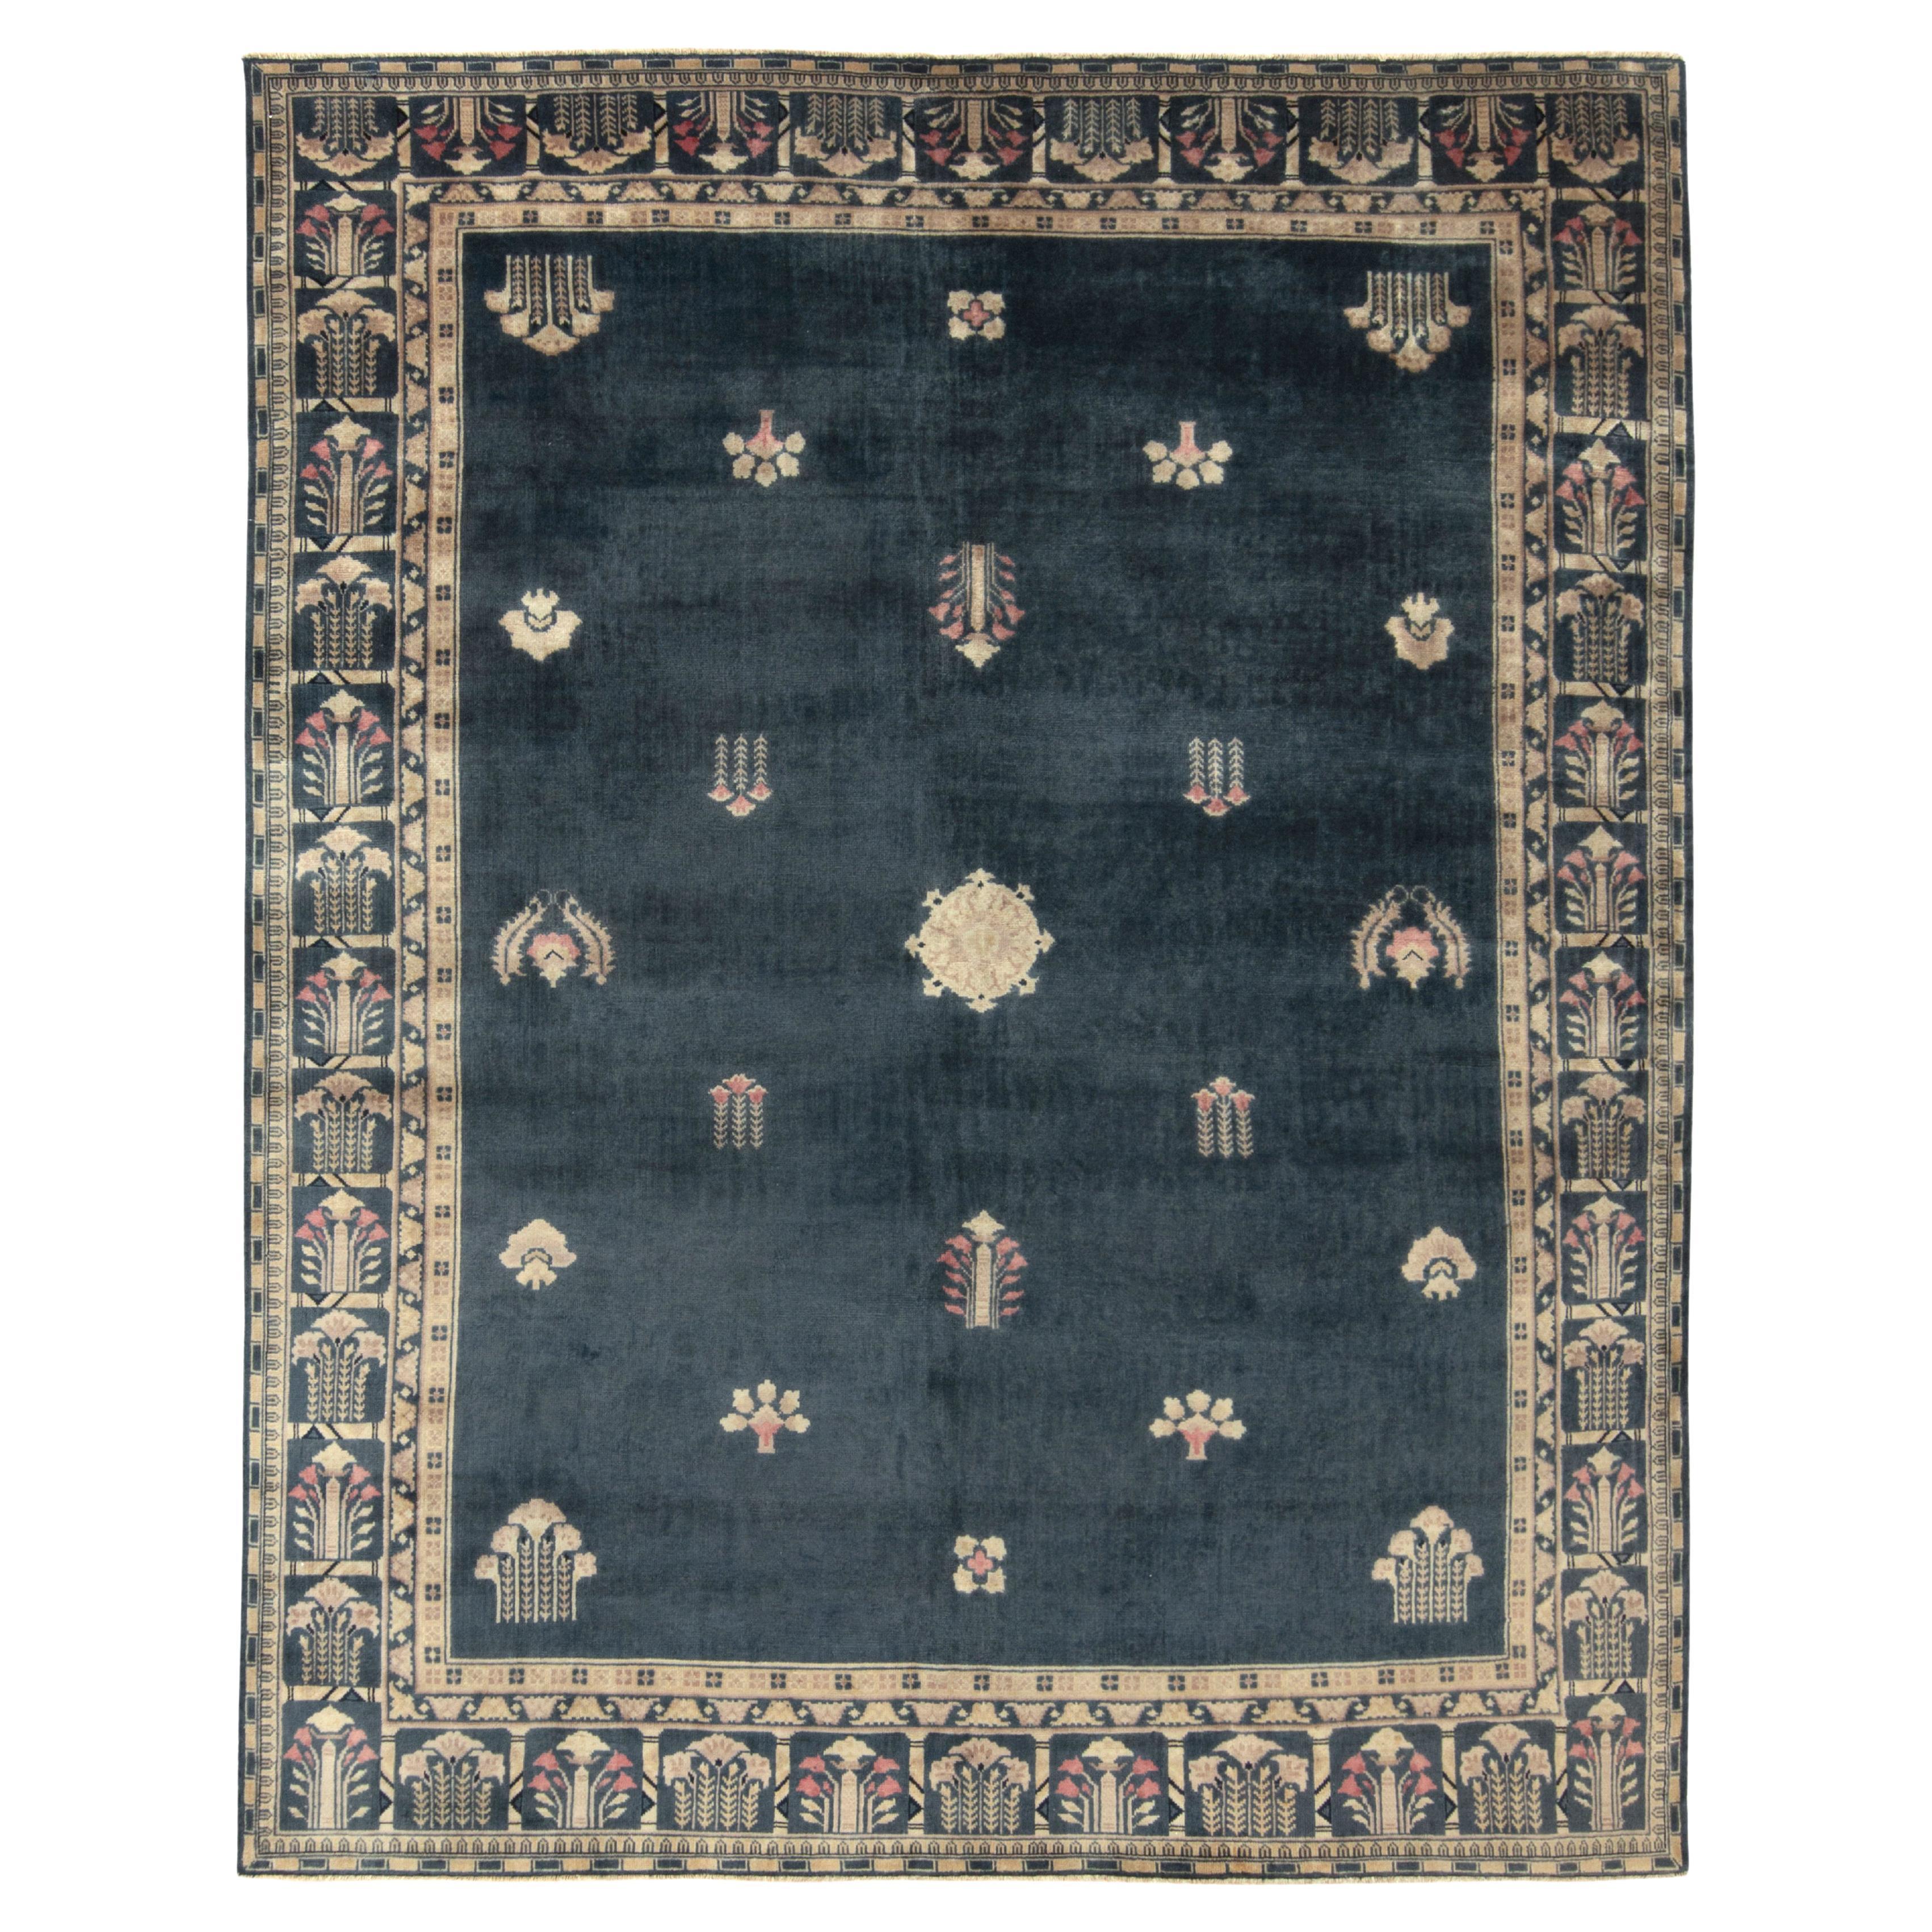 Vintage Chinese Deco Style Rug in Blue Beige-Brown Floral Pattern by Rug & Kilim For Sale